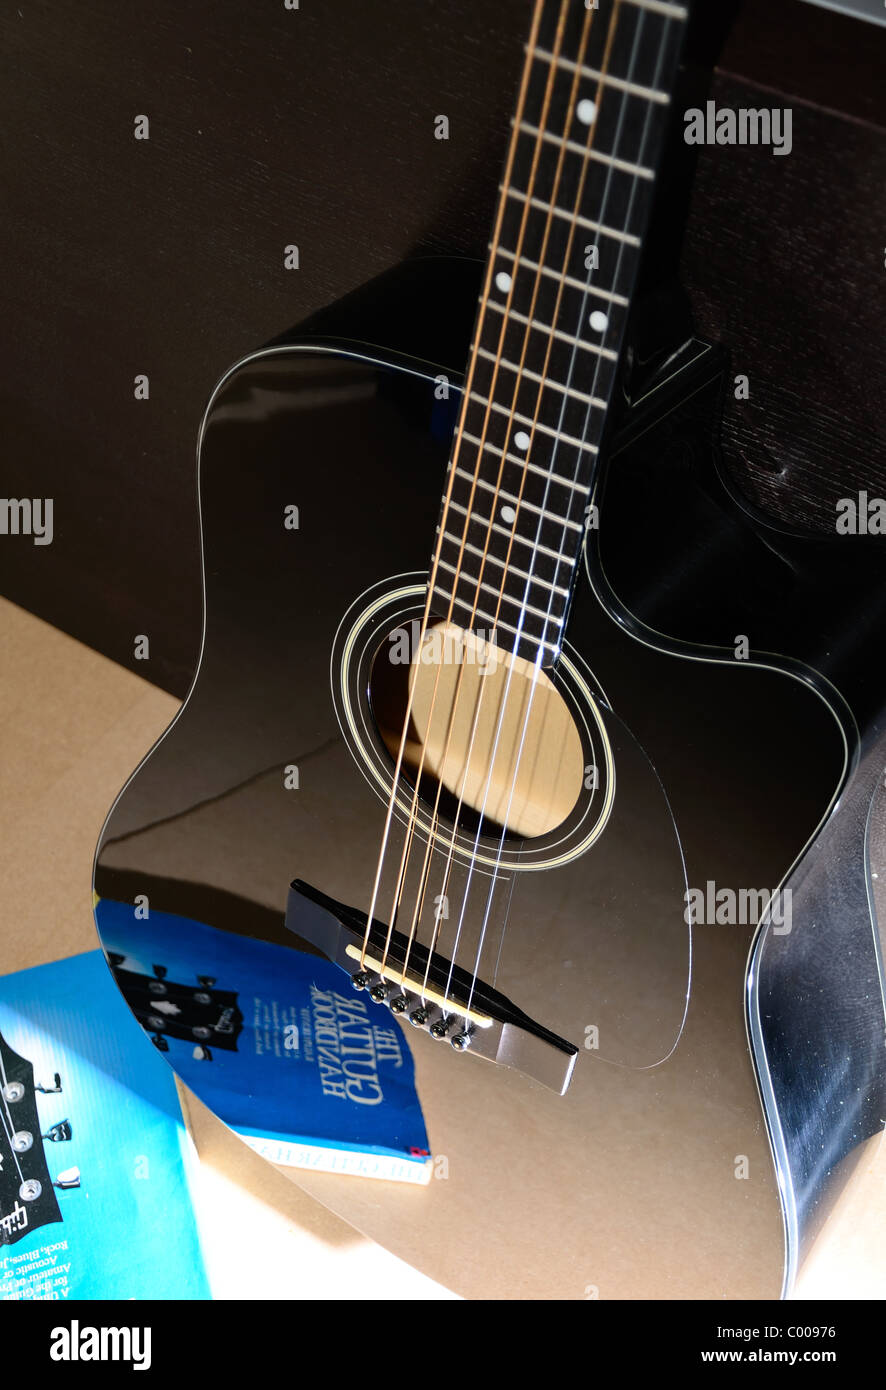 Black acoustic guitar with reflection of the guitar handbook Stock Photo